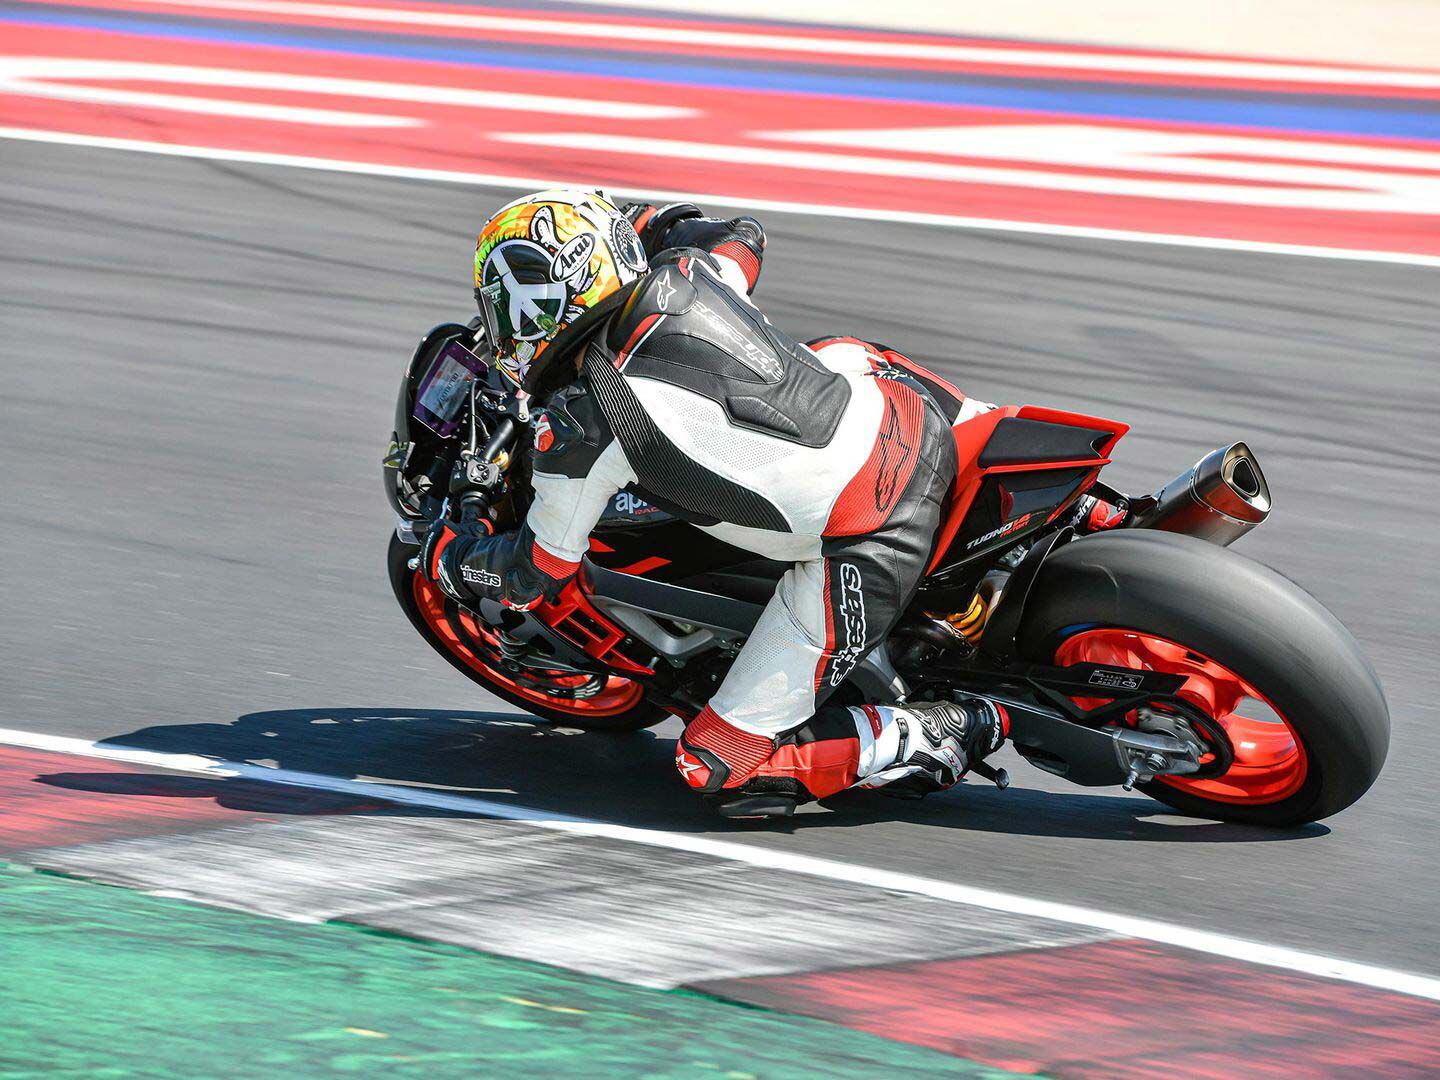 Fact: Motorcycles are more fun when you’re riding them dressed head to toe in leather. A 2022 Aprilia RSV Tuono being put through its paces by an official Aprilia test rider.